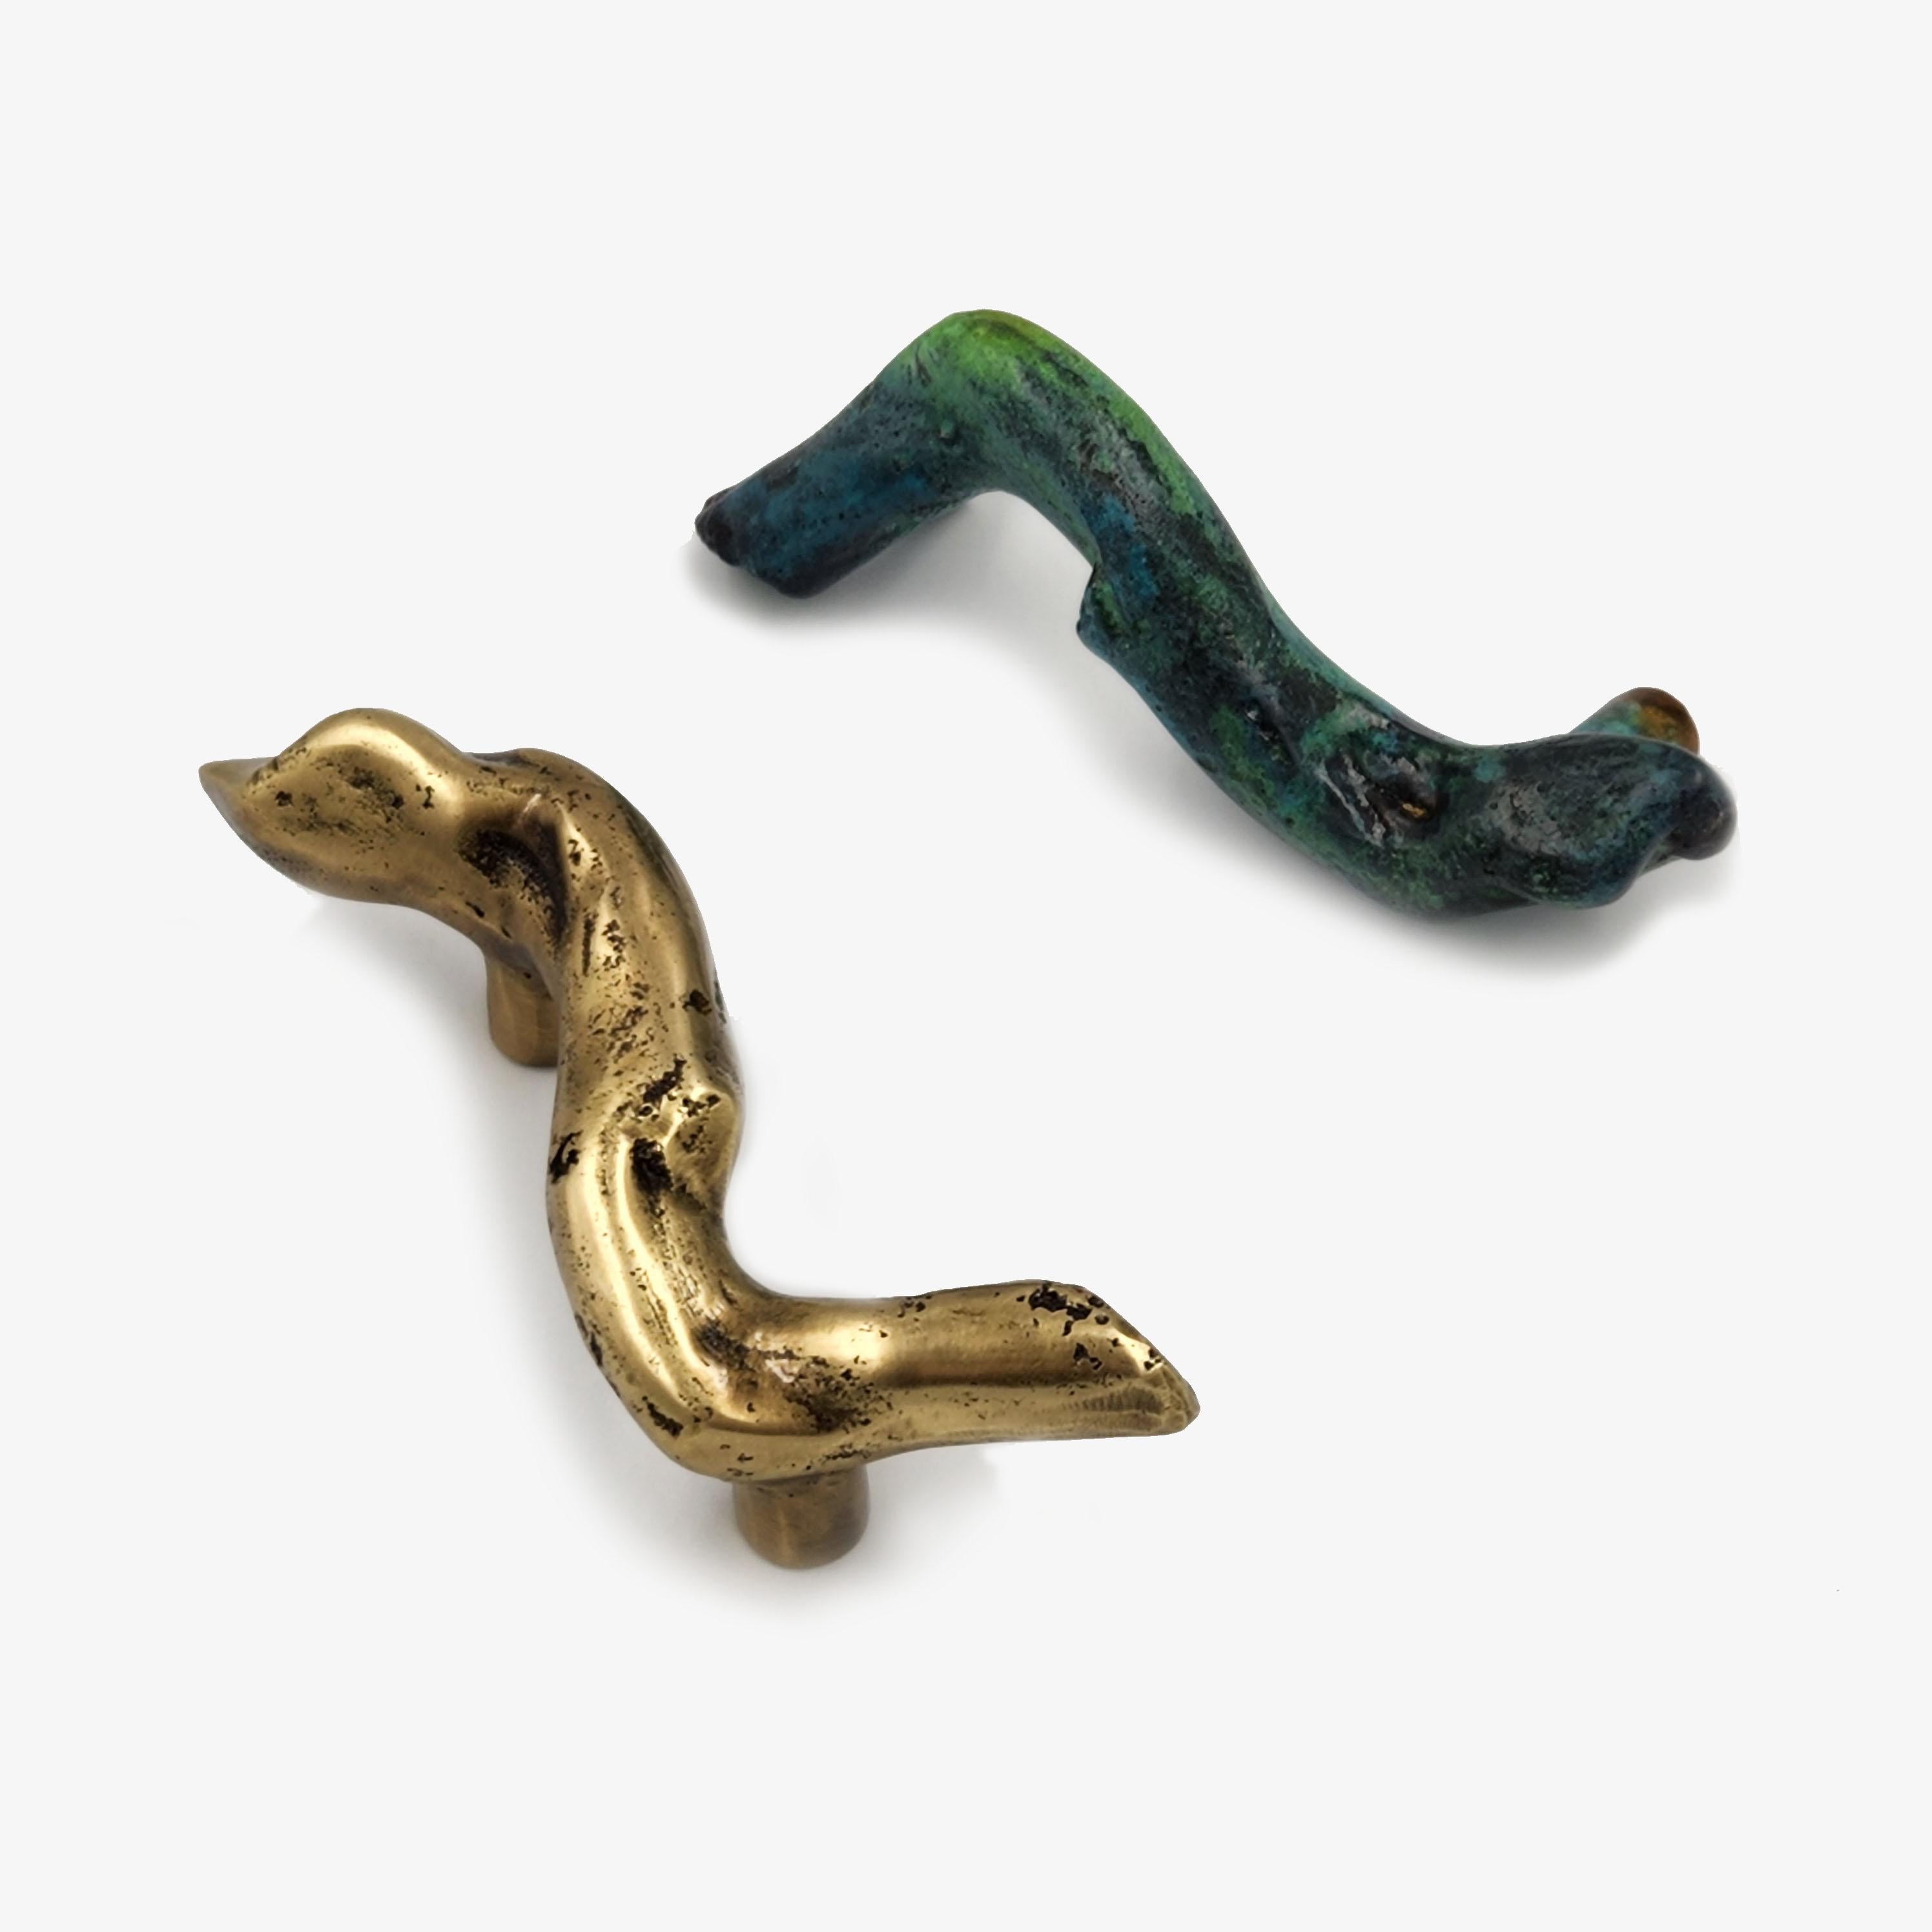 A tribute to nature, infinite source of patterns with mineral elements. Solid brass pull handle made in our workshops.
Also available vert de gris patina.